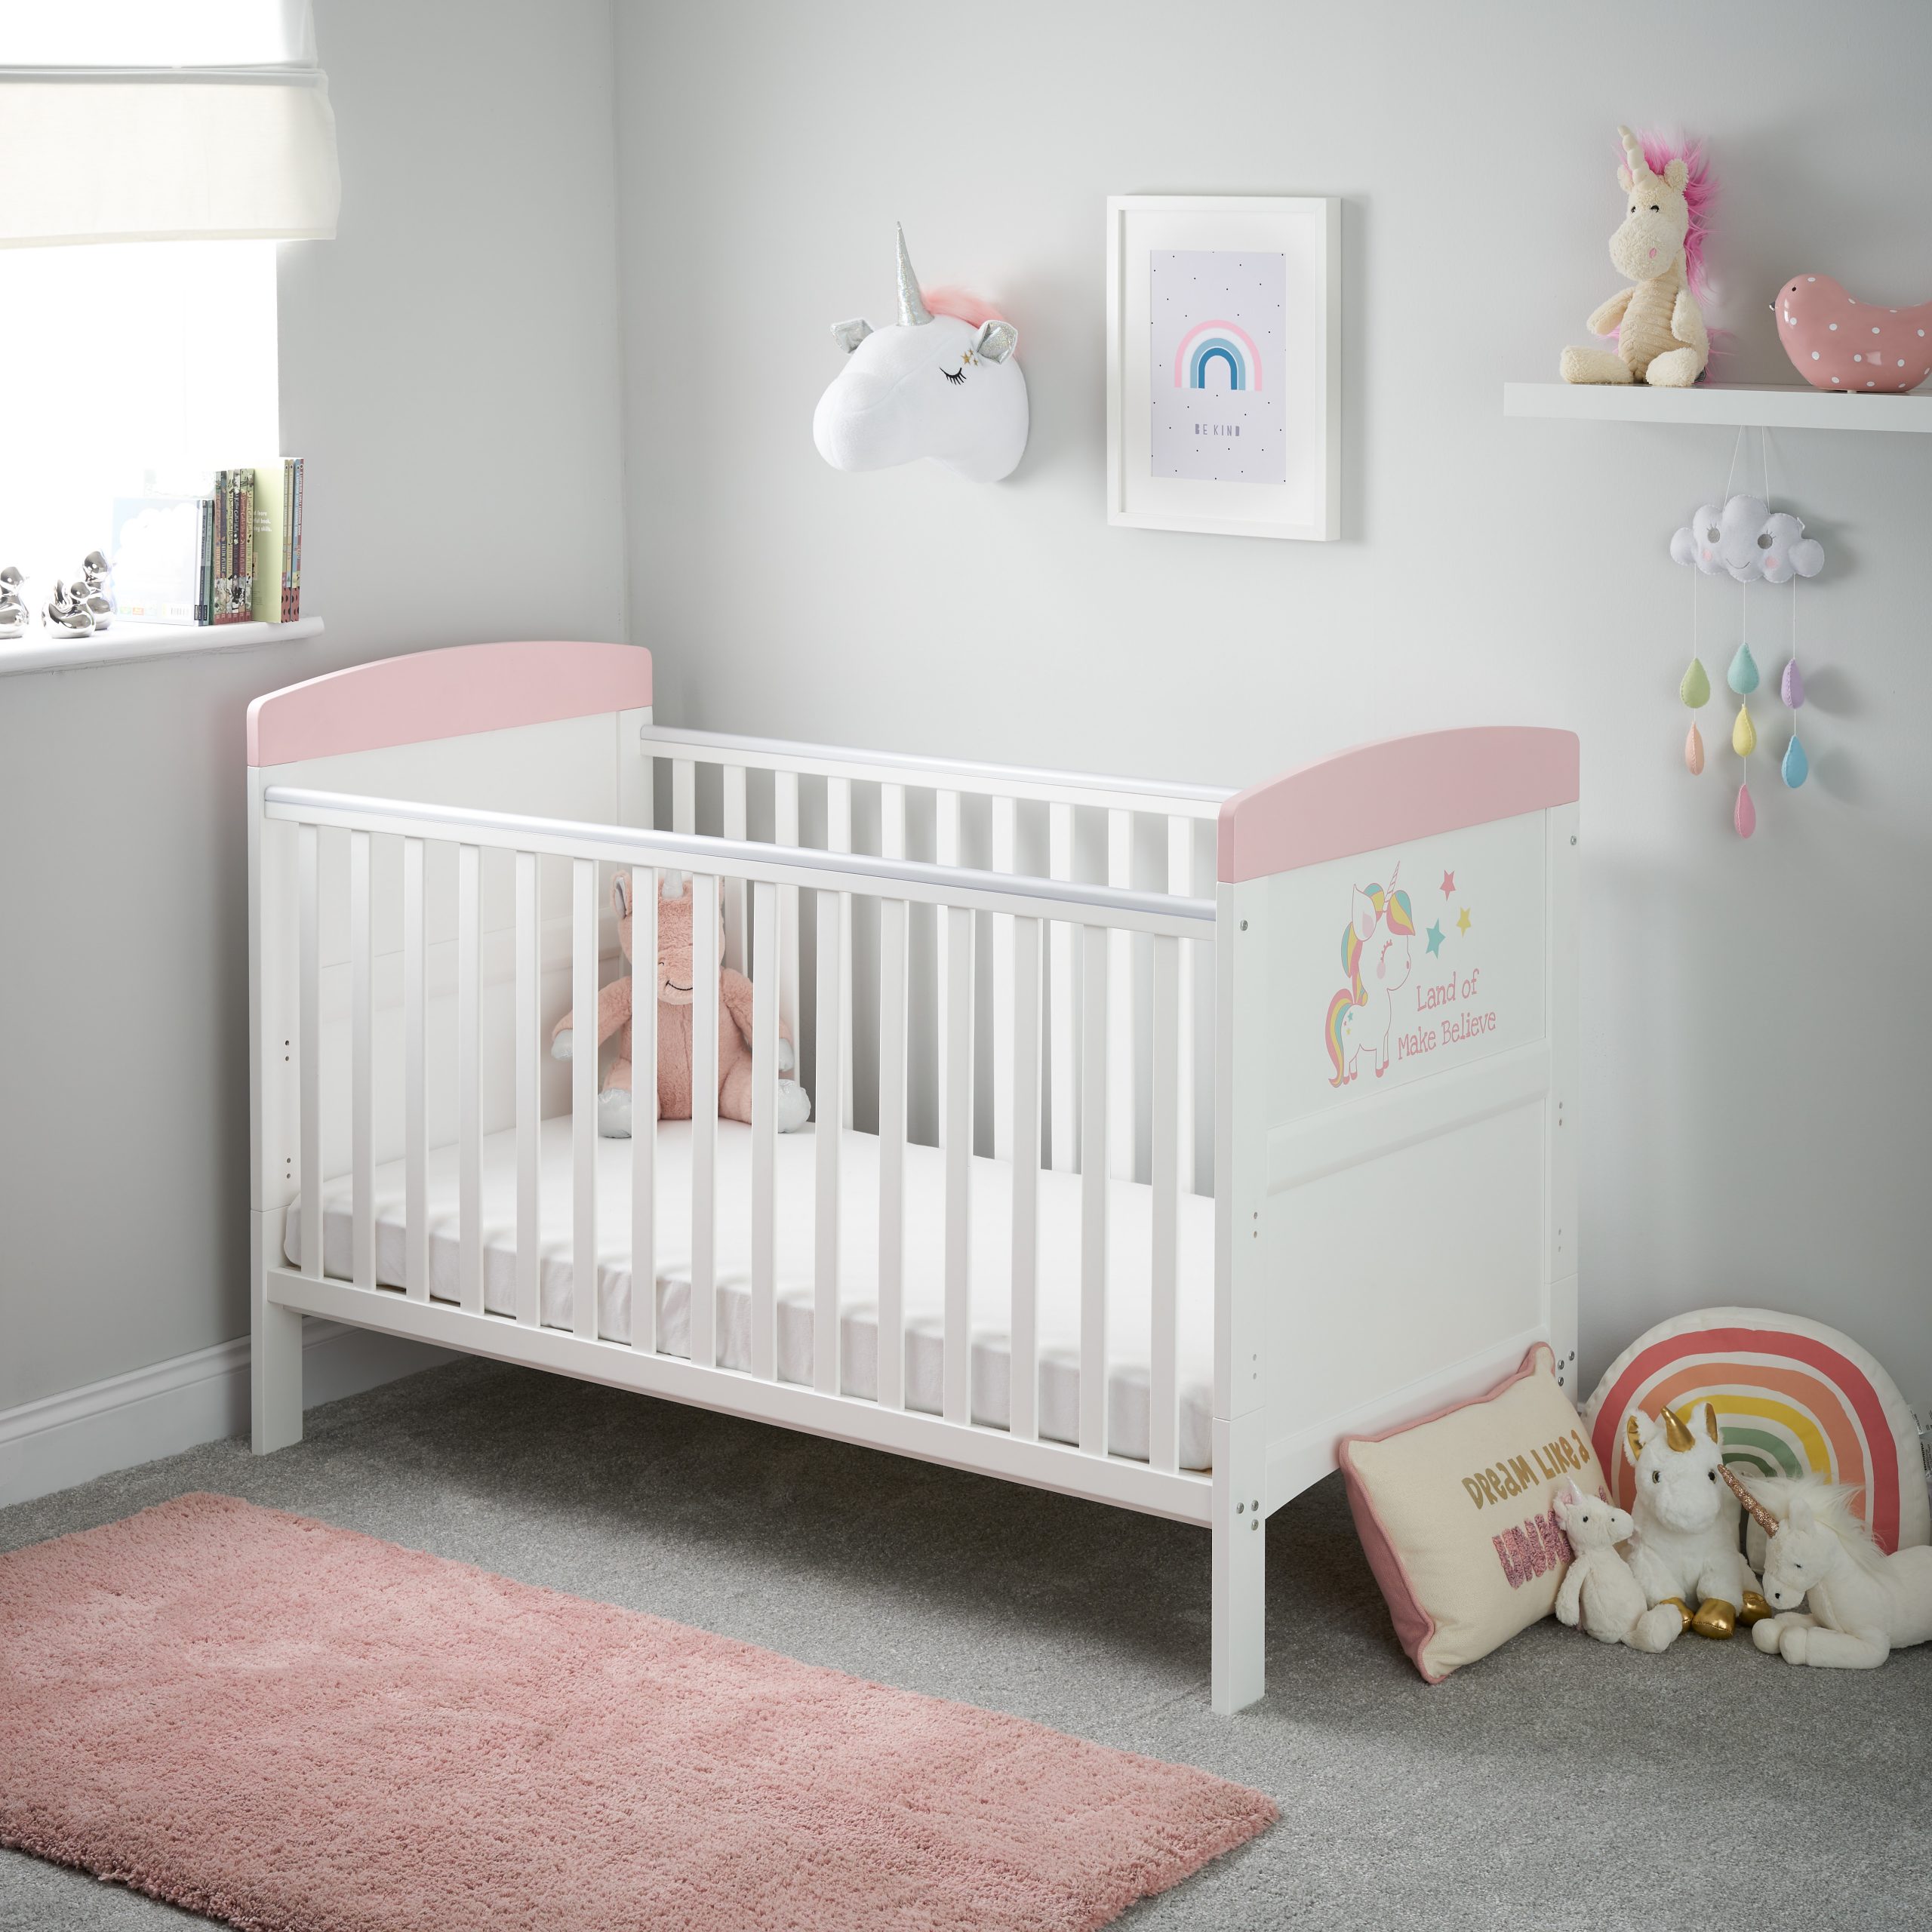 grey and pink cot bedding